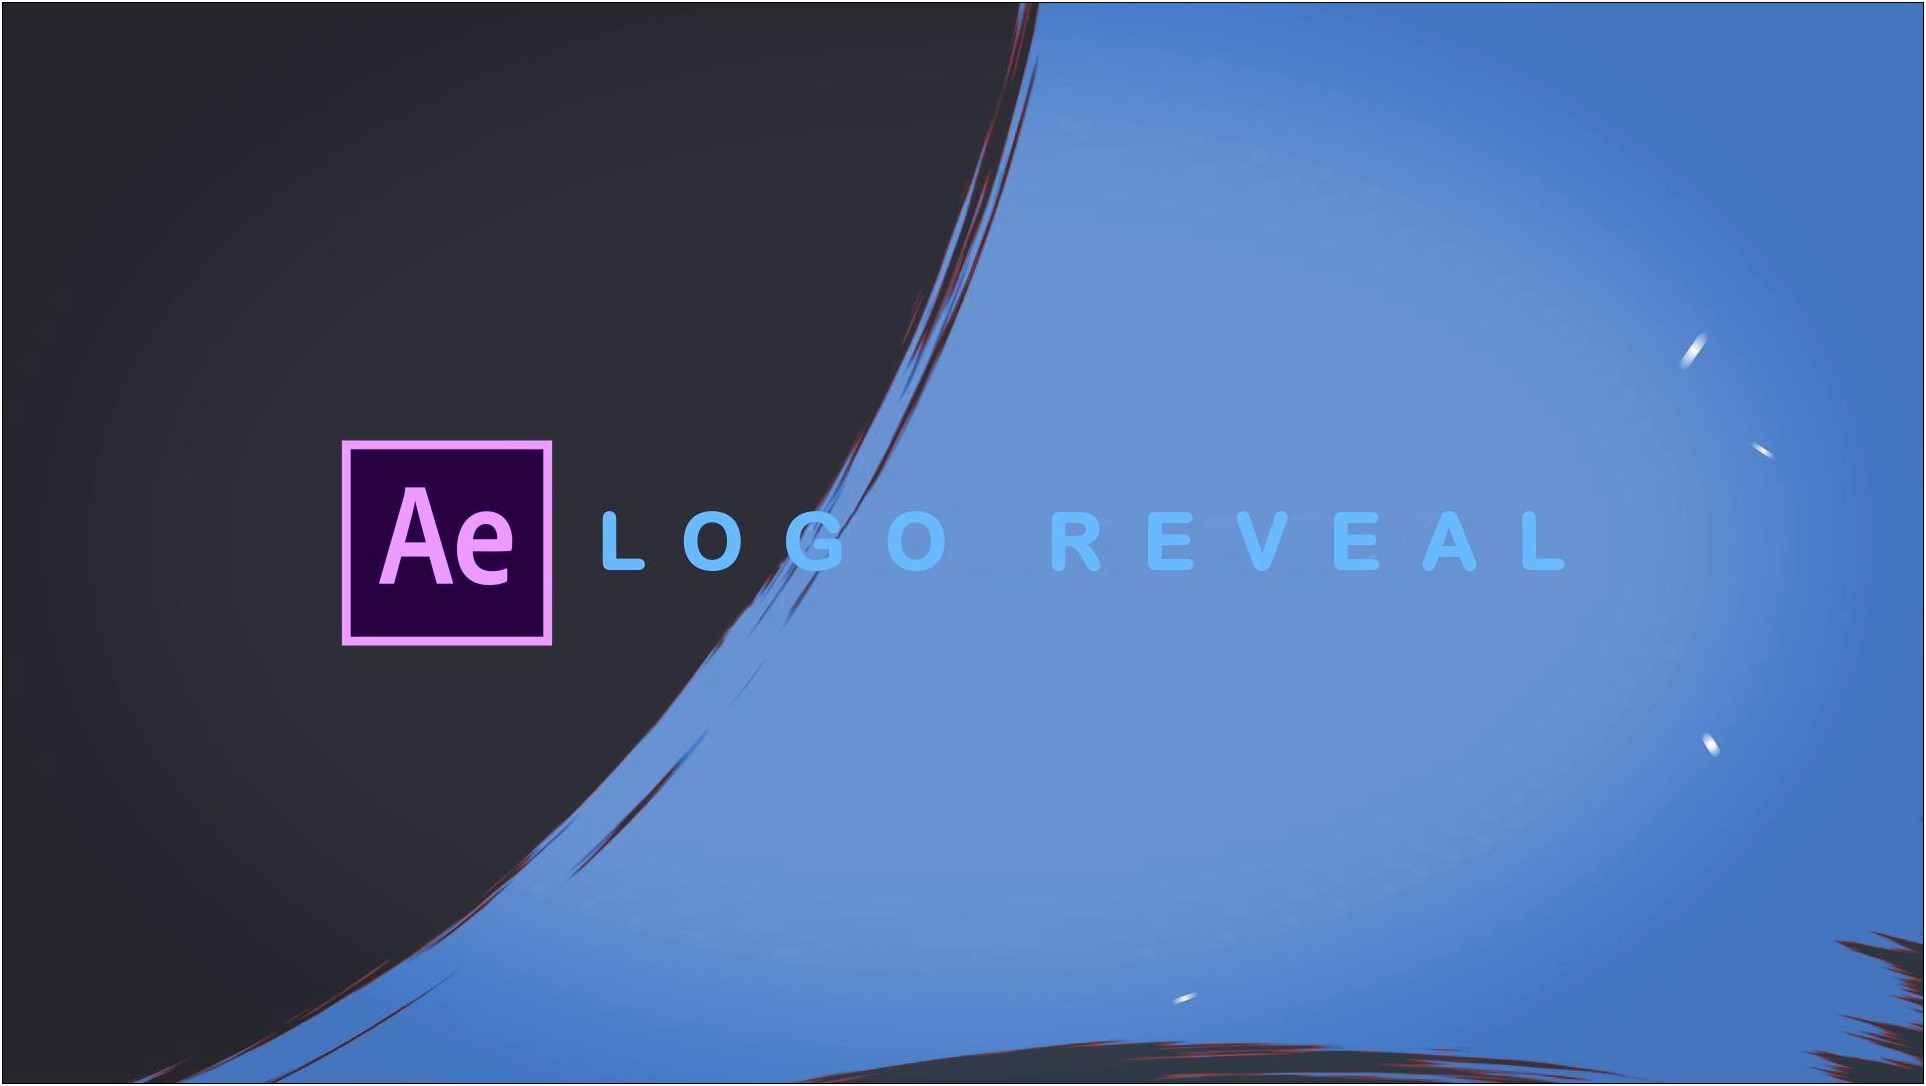 Logo Transition After Effects Template Free